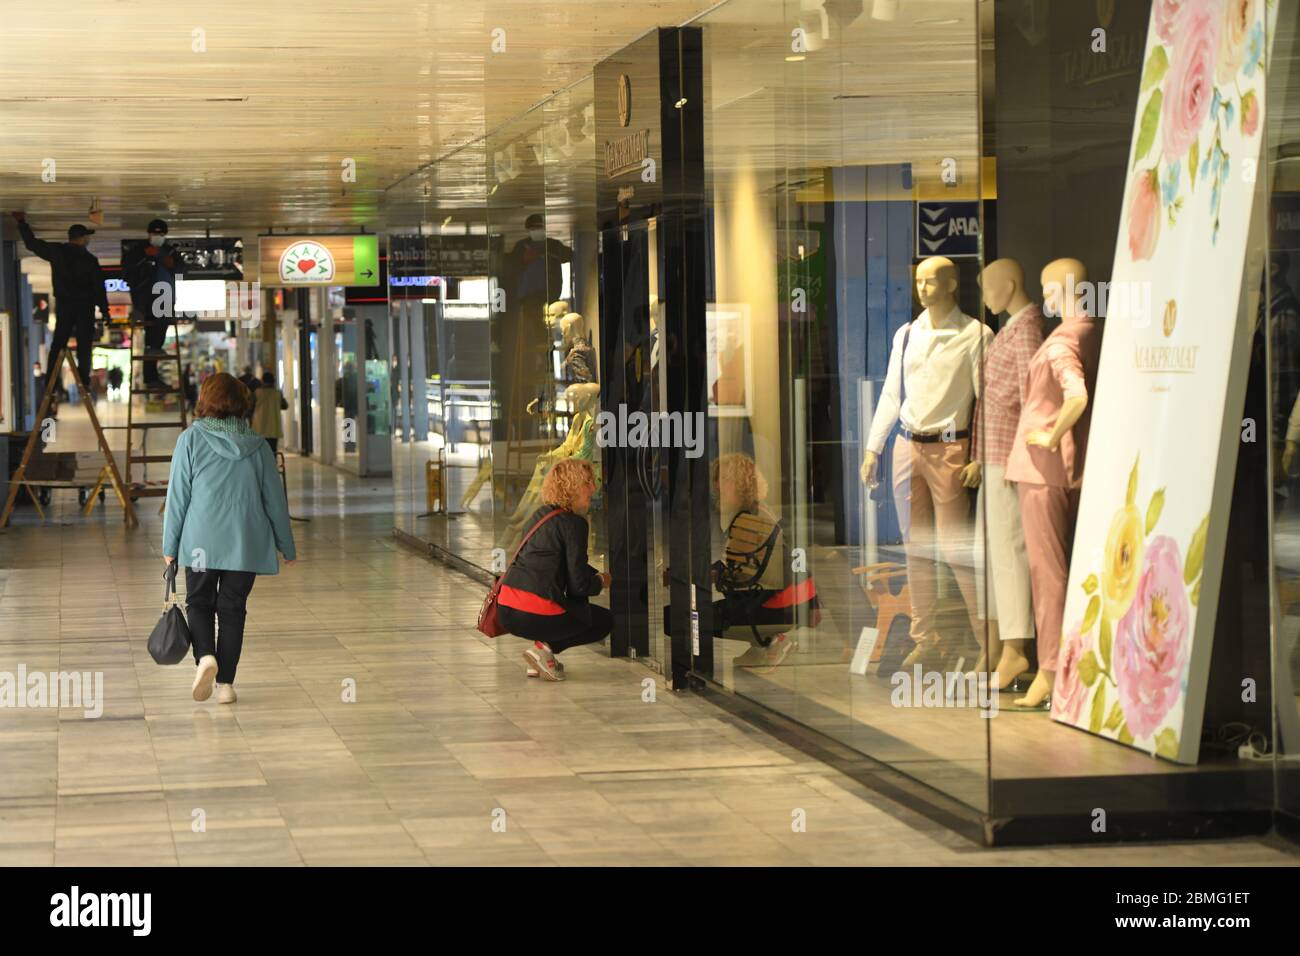 Skopje. 8th May, 2020. Shop owners prepare for business in Skopje, capital of North Macedonia on May 8, 2020. North Macedonia government has announced easing of restriction measures by allowing some retail businesses to resume operation. Credit: Toni Jovanovski/Xinhua/Alamy Live News Stock Photo